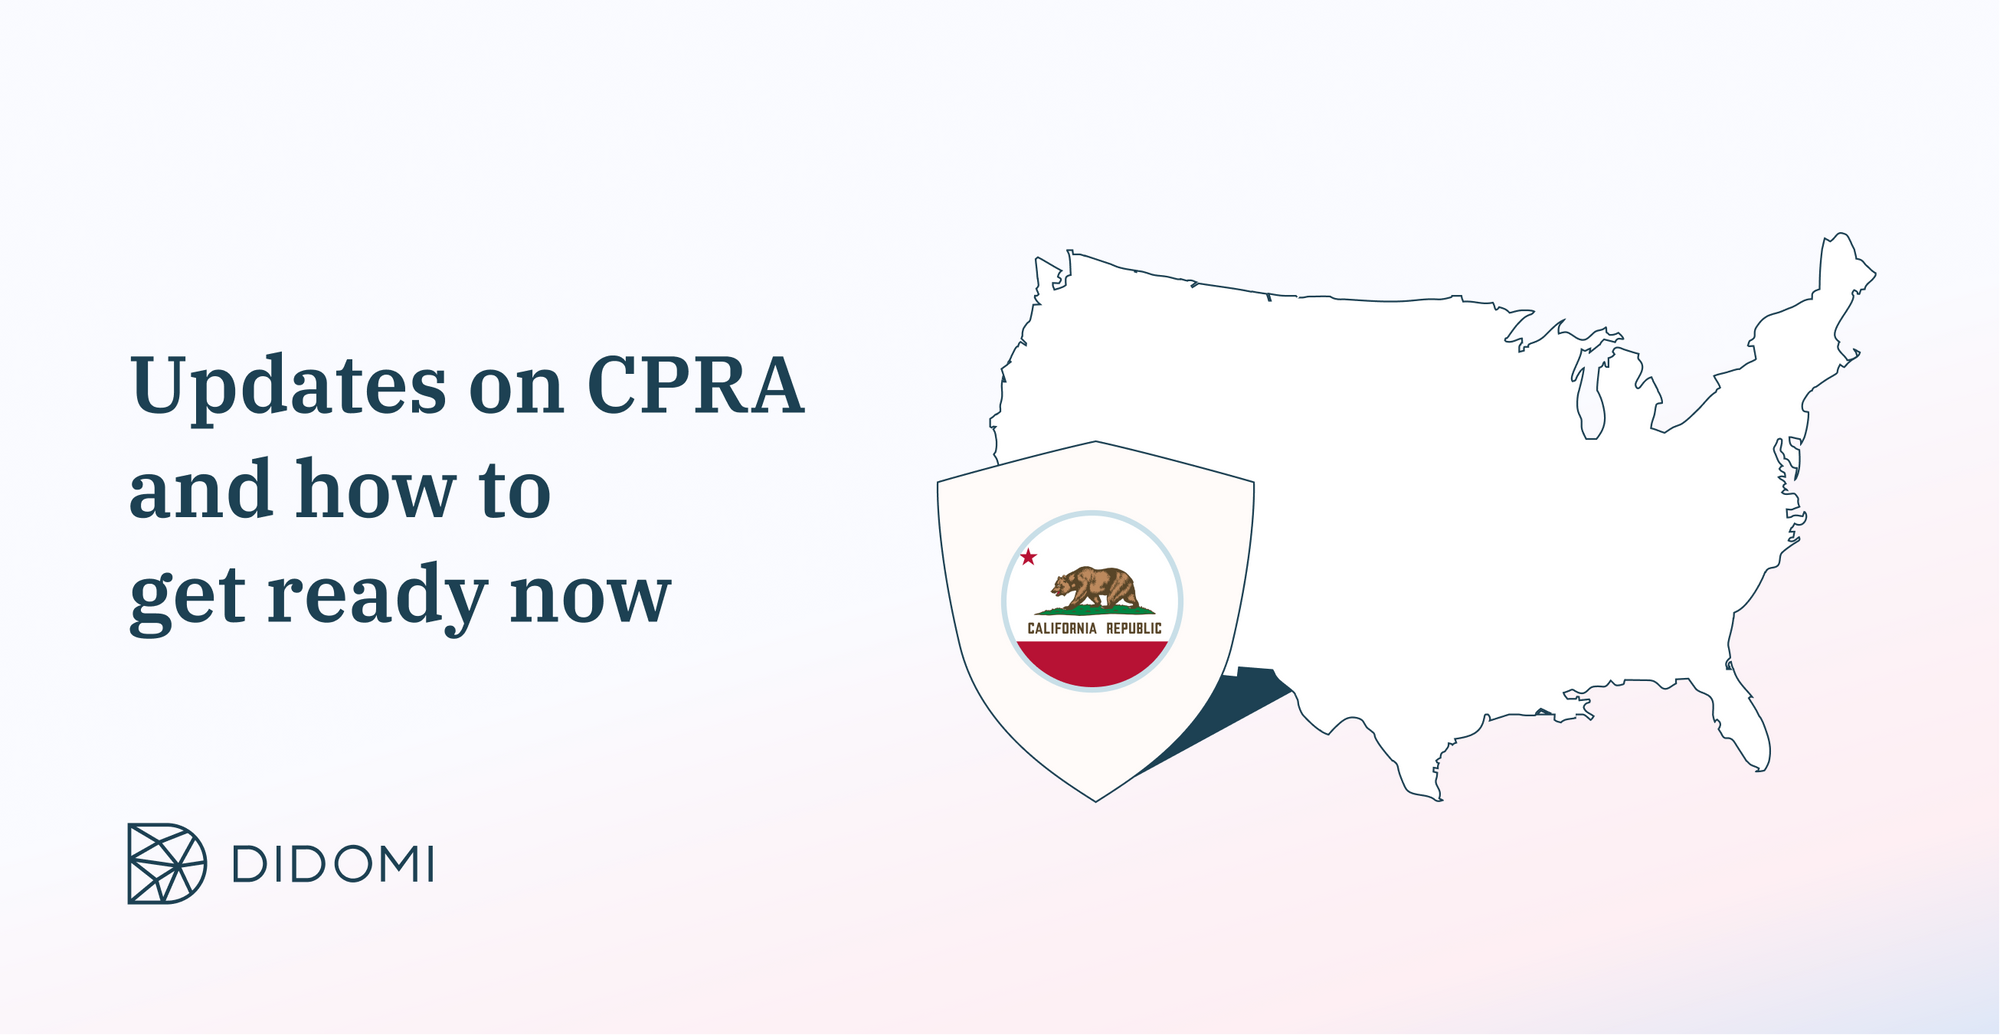 CPRA updates: How to get ready now